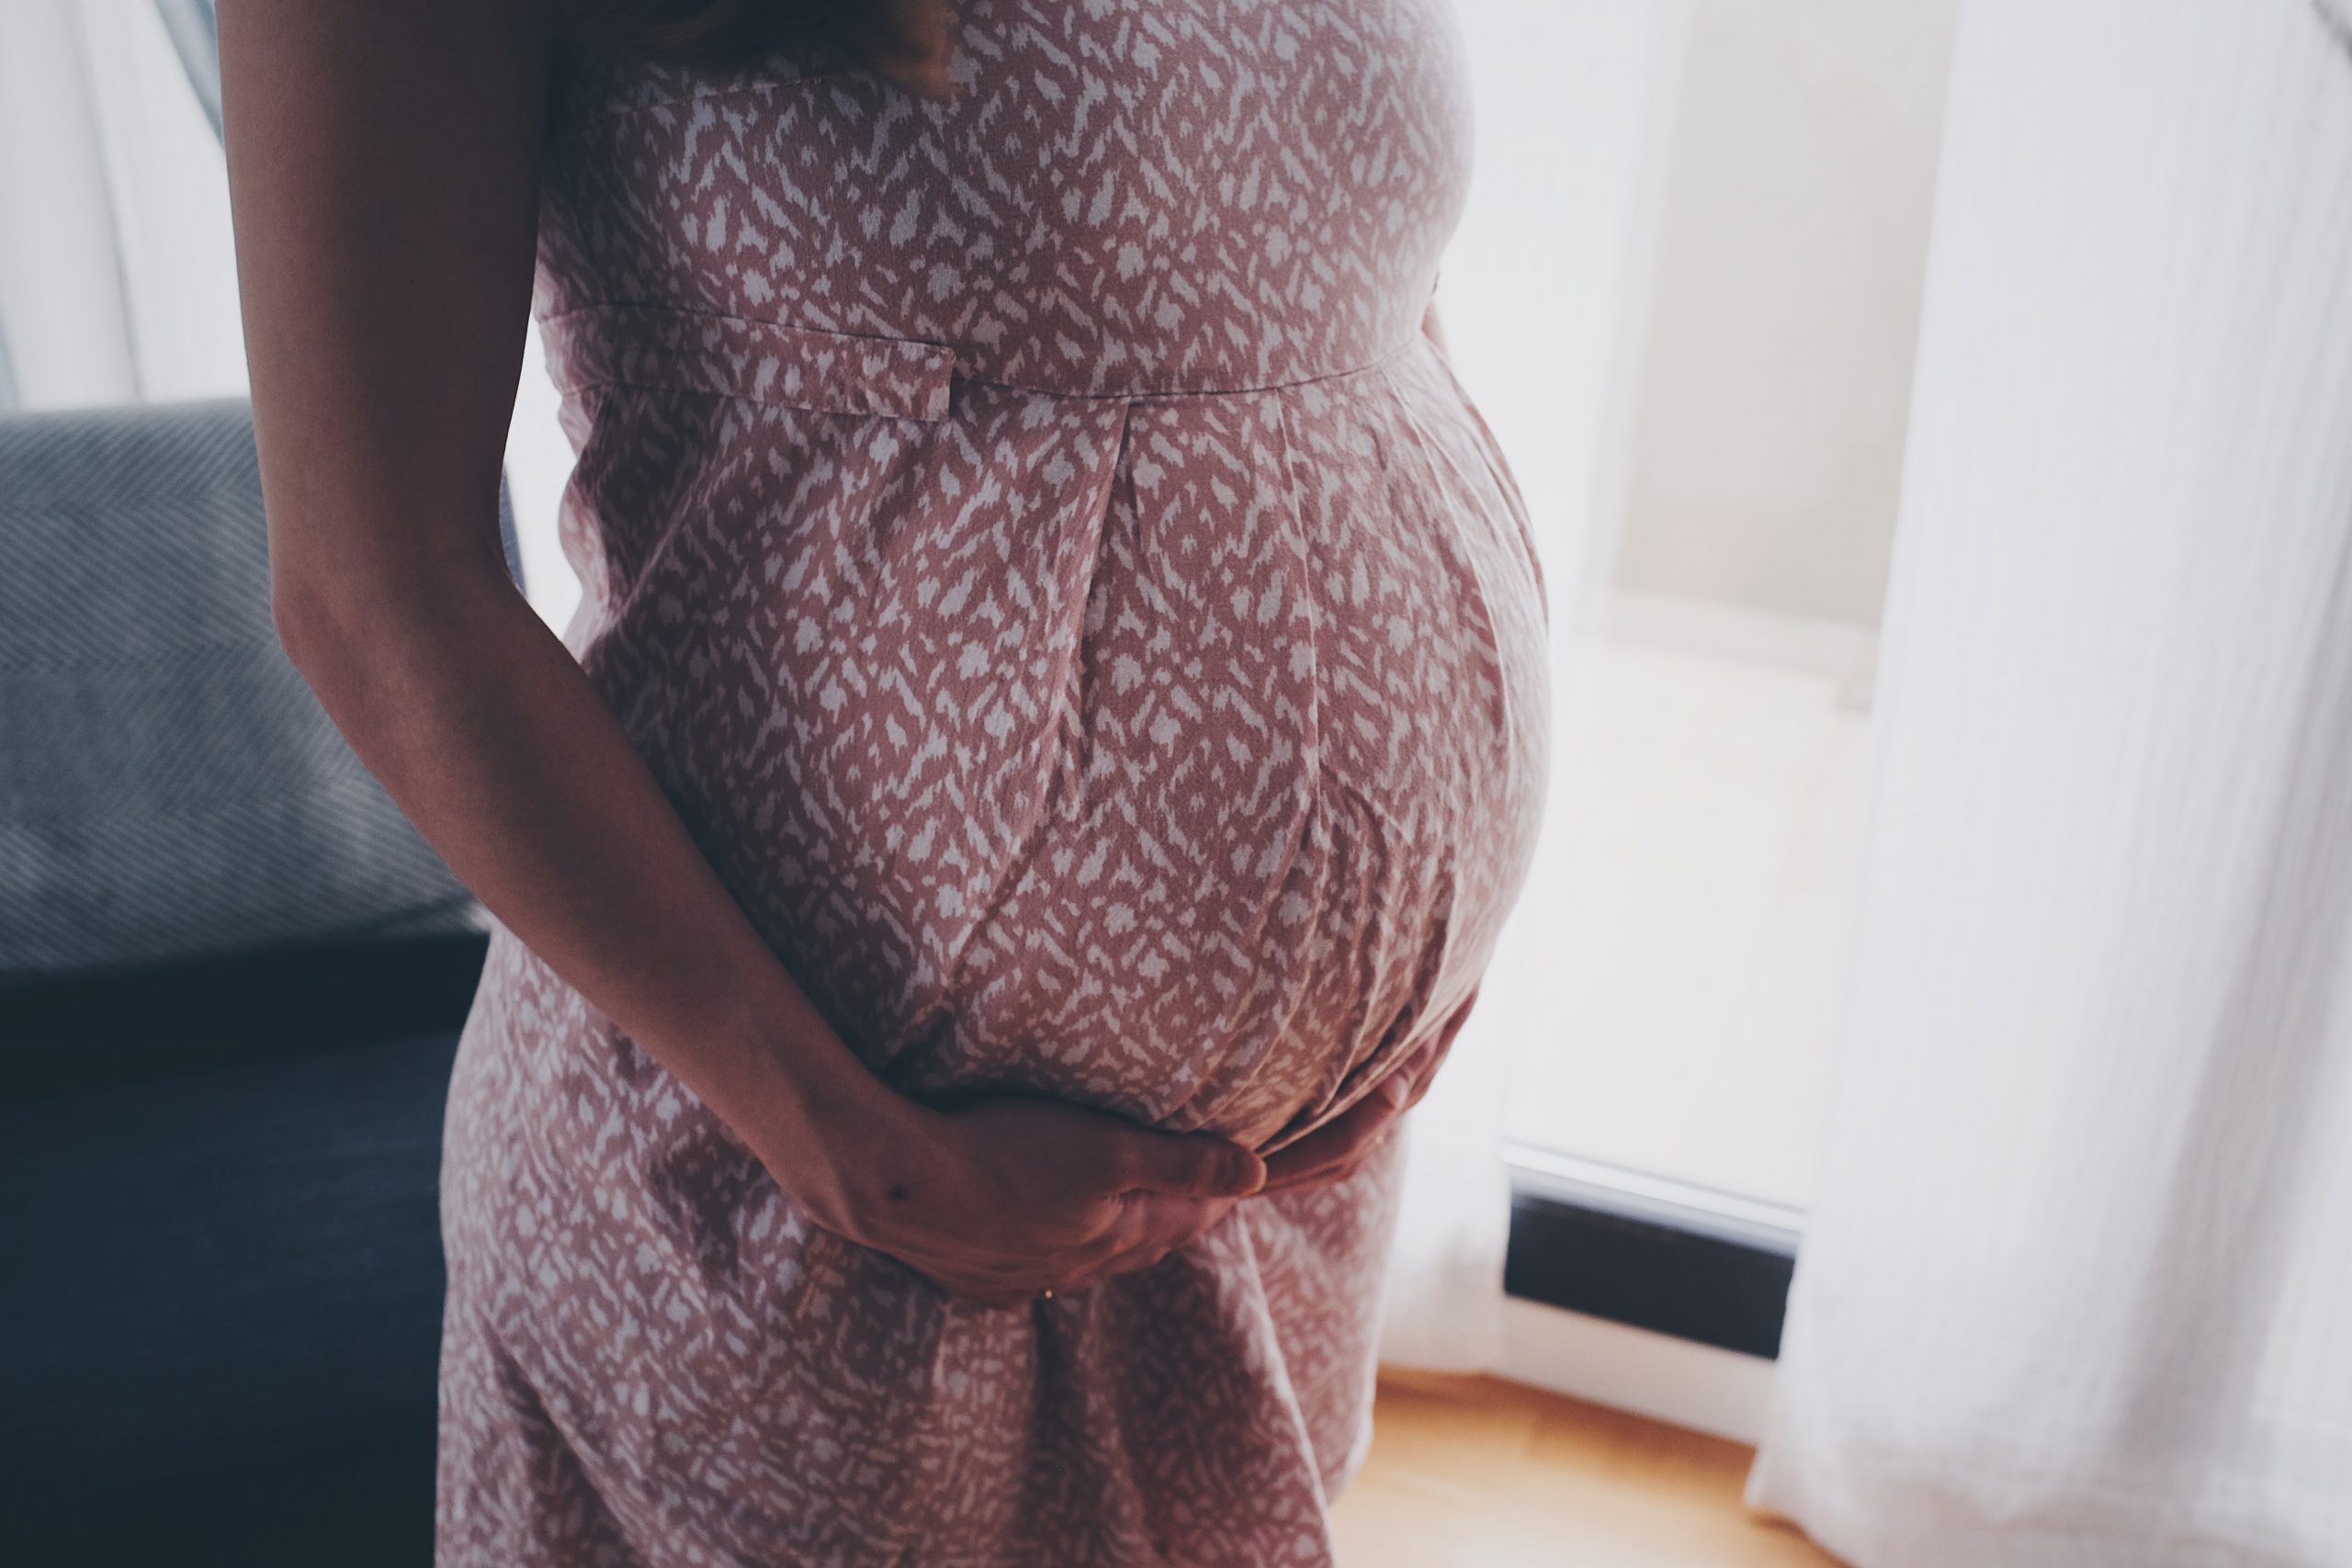 Image of a women in a patterned dress holding her pregnancy belly